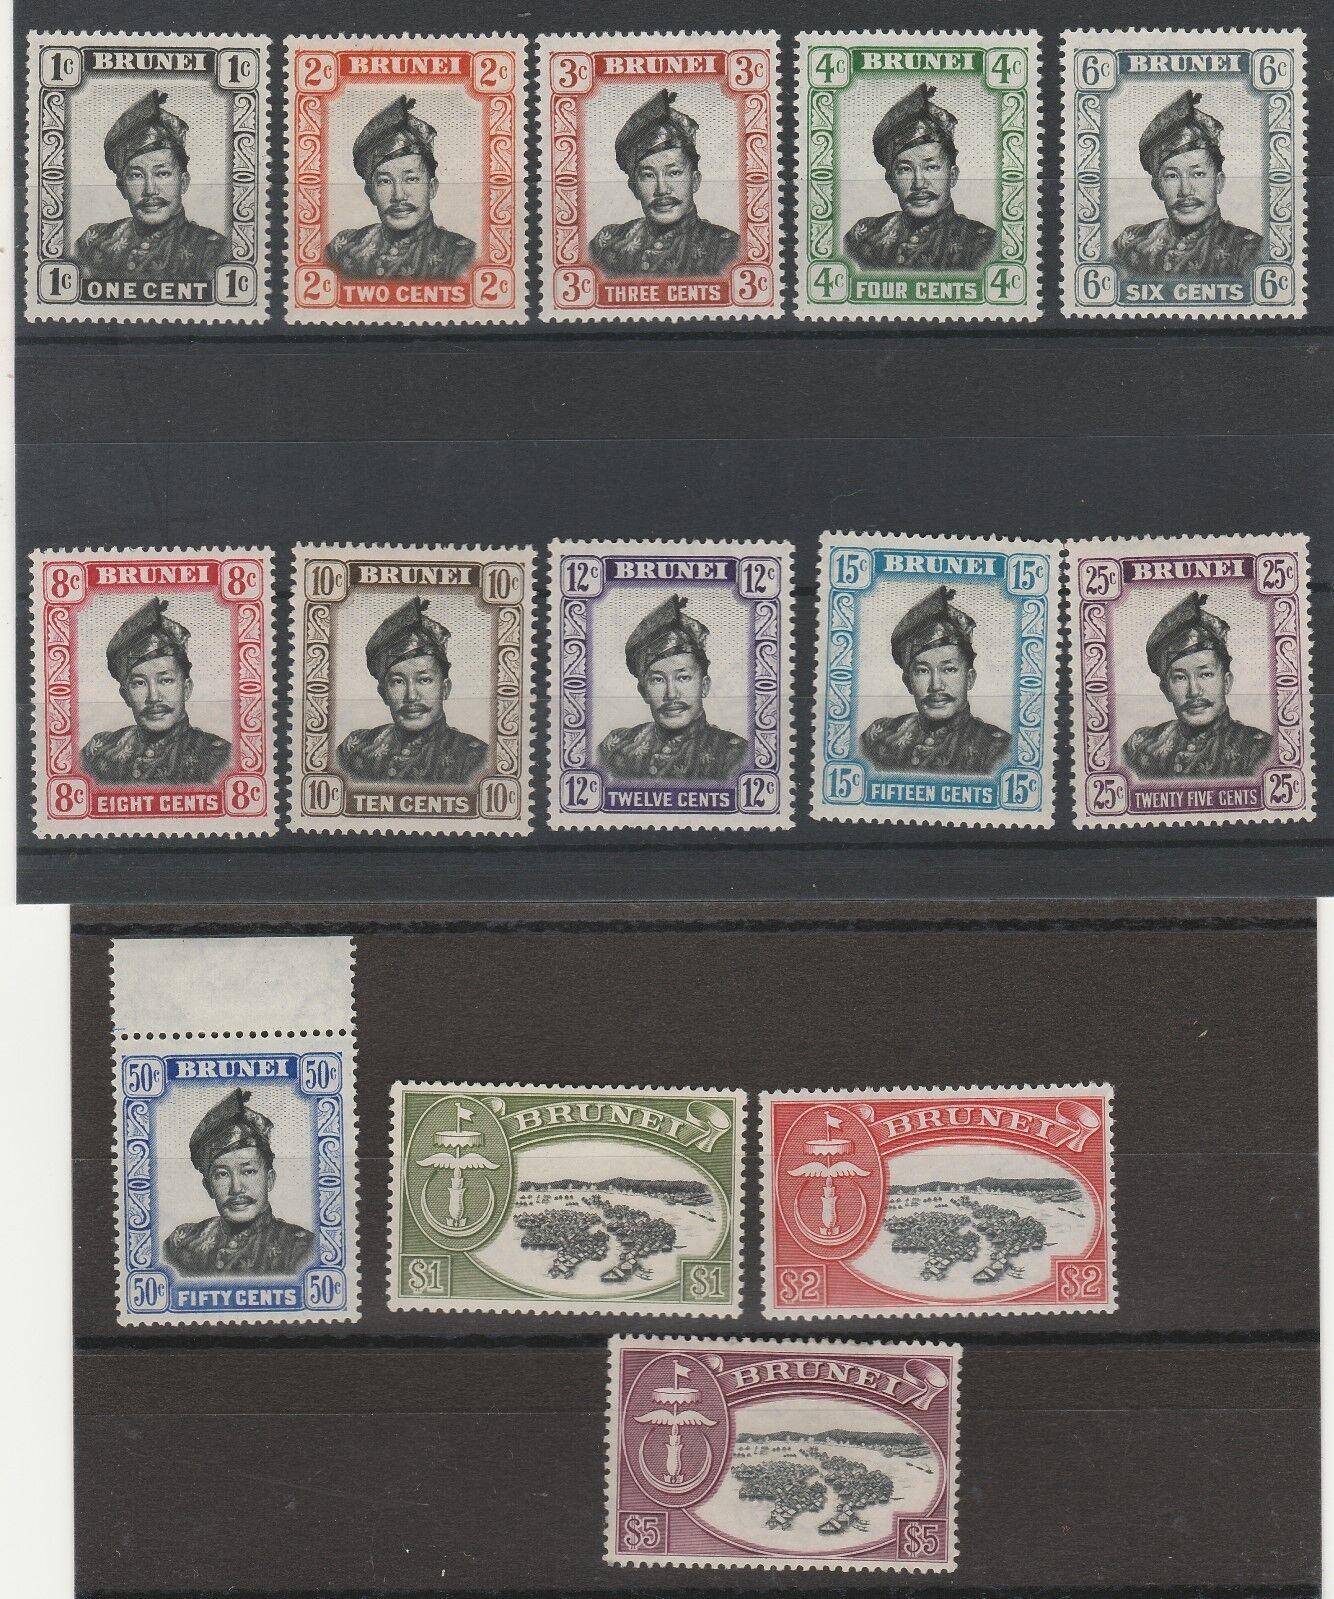 Don't miss the campaign BRUNEI 1952 SULTAN VIEW SET Max 44% OFF